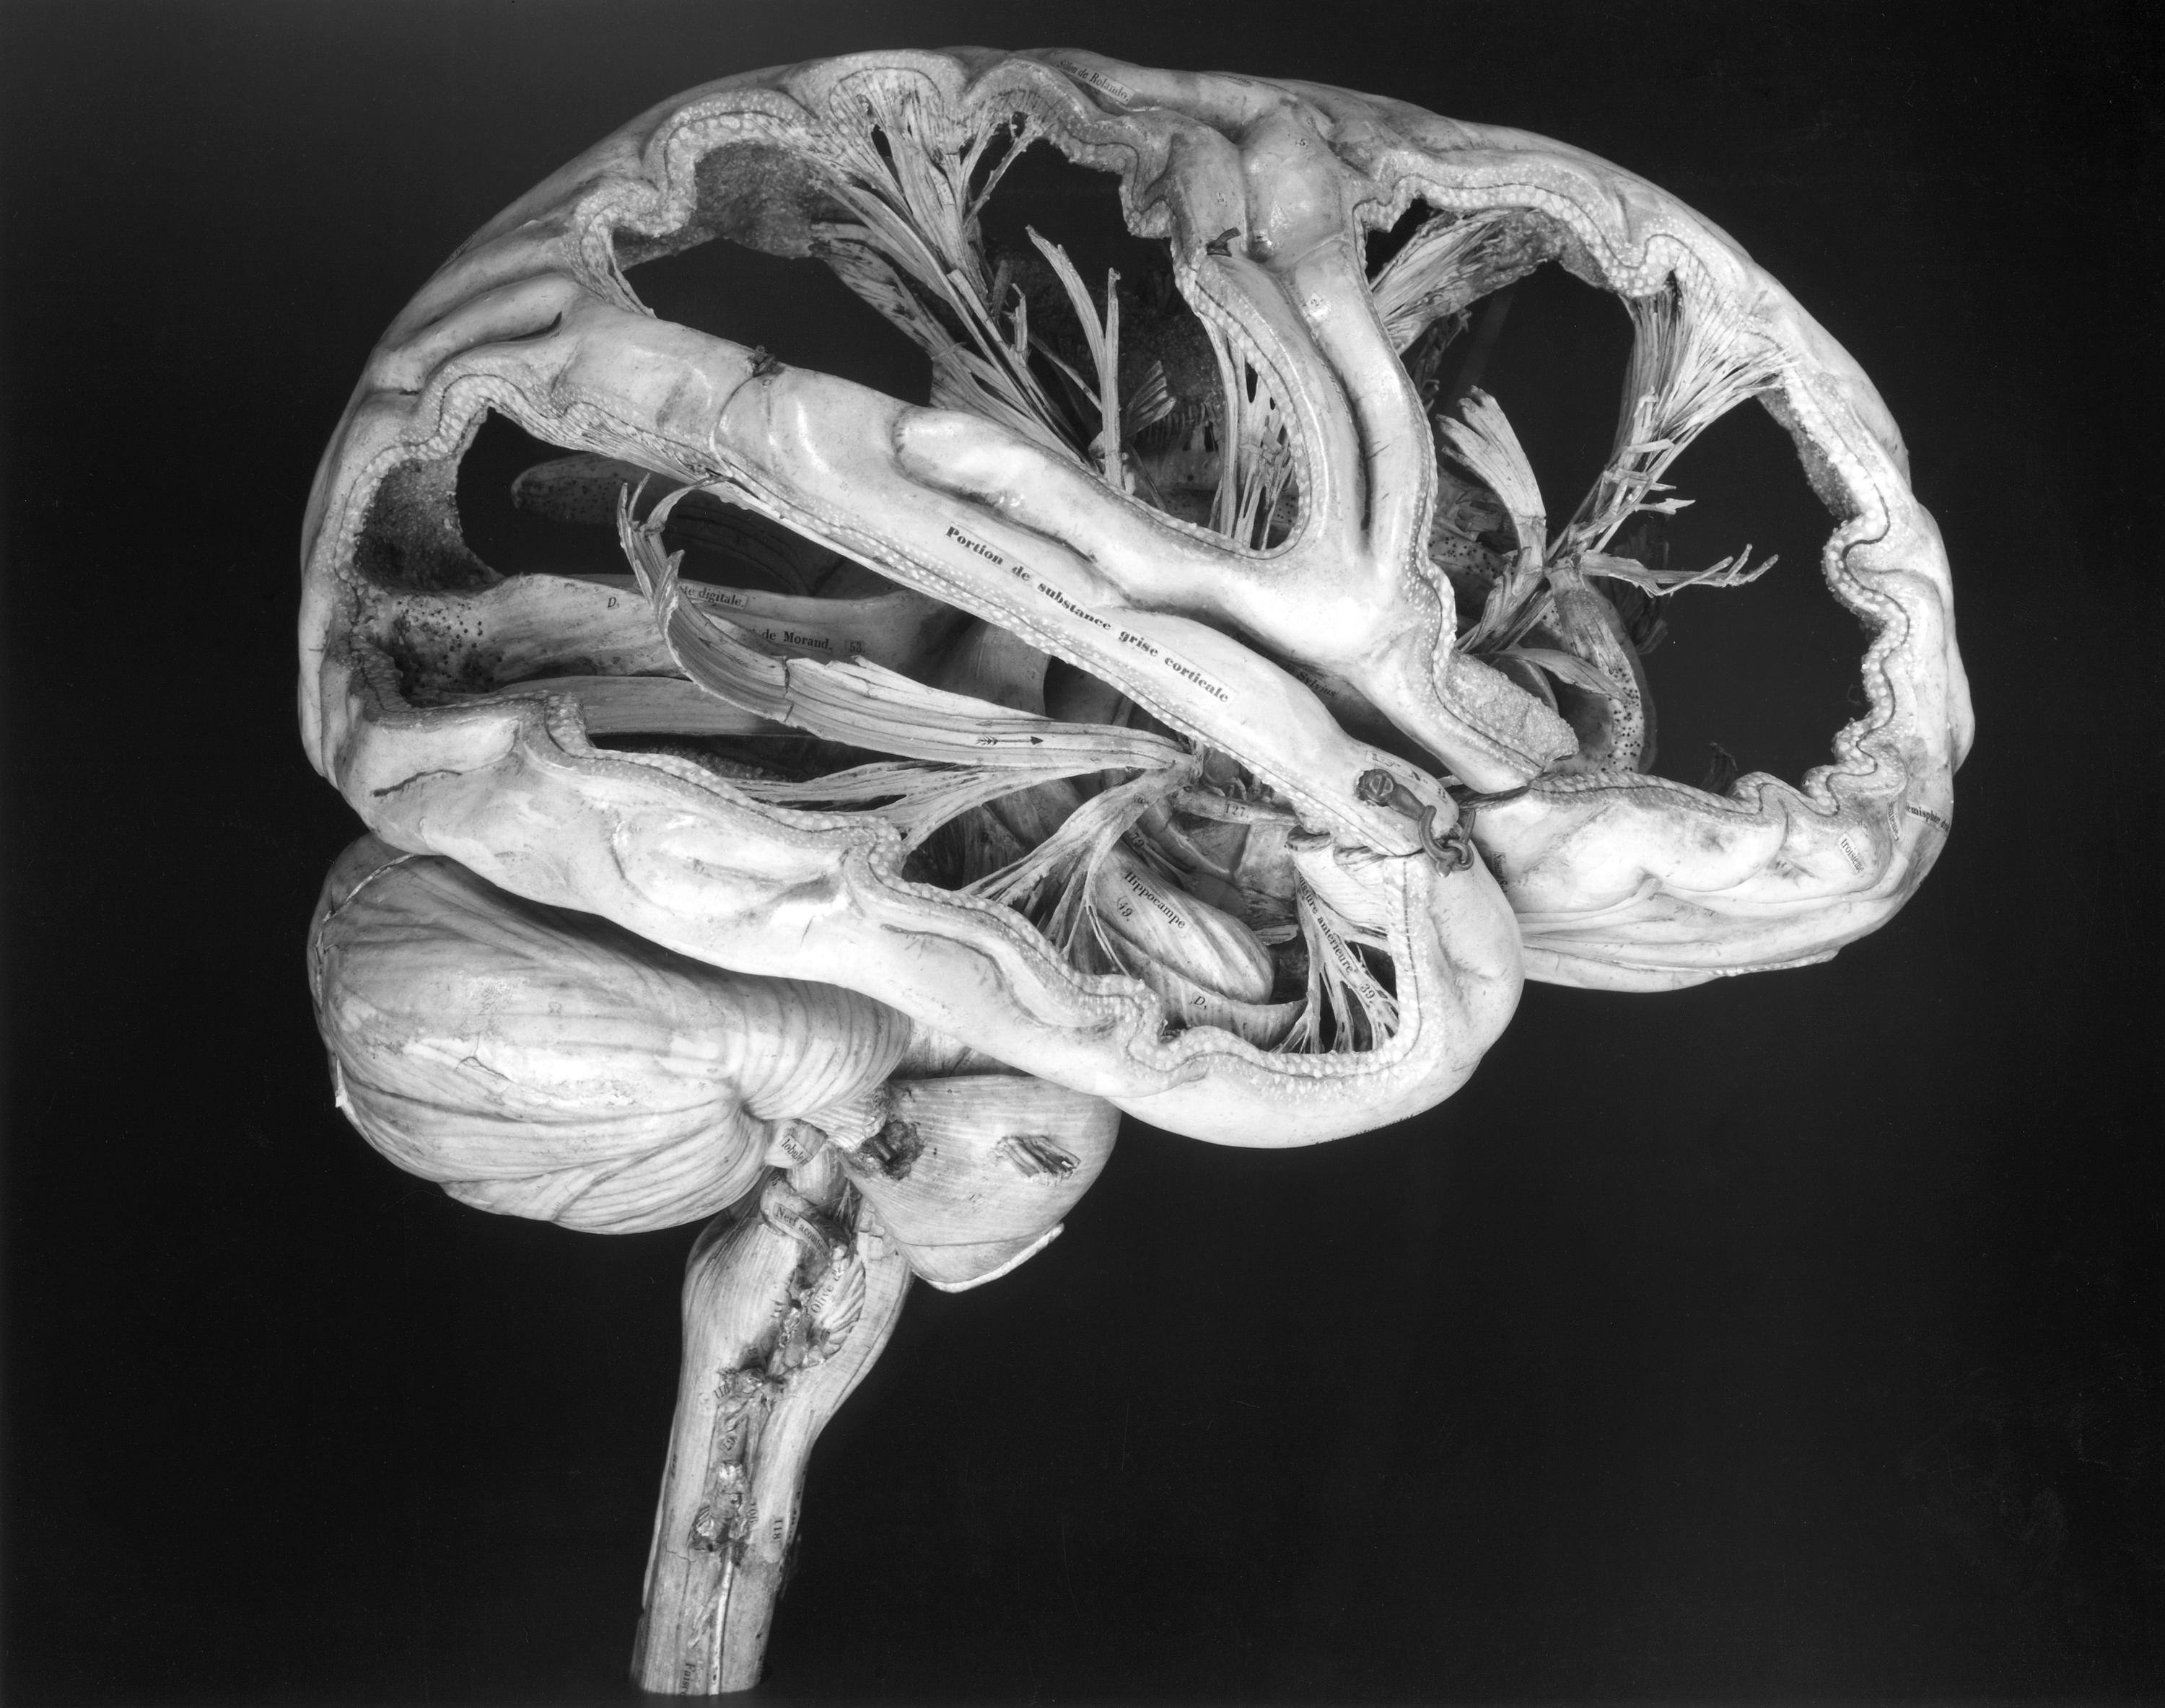 Model of a human brain, sectioned, French, first half 19th century. The model shows a sectioned human brain made from papier mâché. The parts can be removed to show the internal structure of the brain. Each is labelled with a number and some of the parts have the name of the section printed in French. This model was used as an aid to teach anatomy. Detail view on black background.